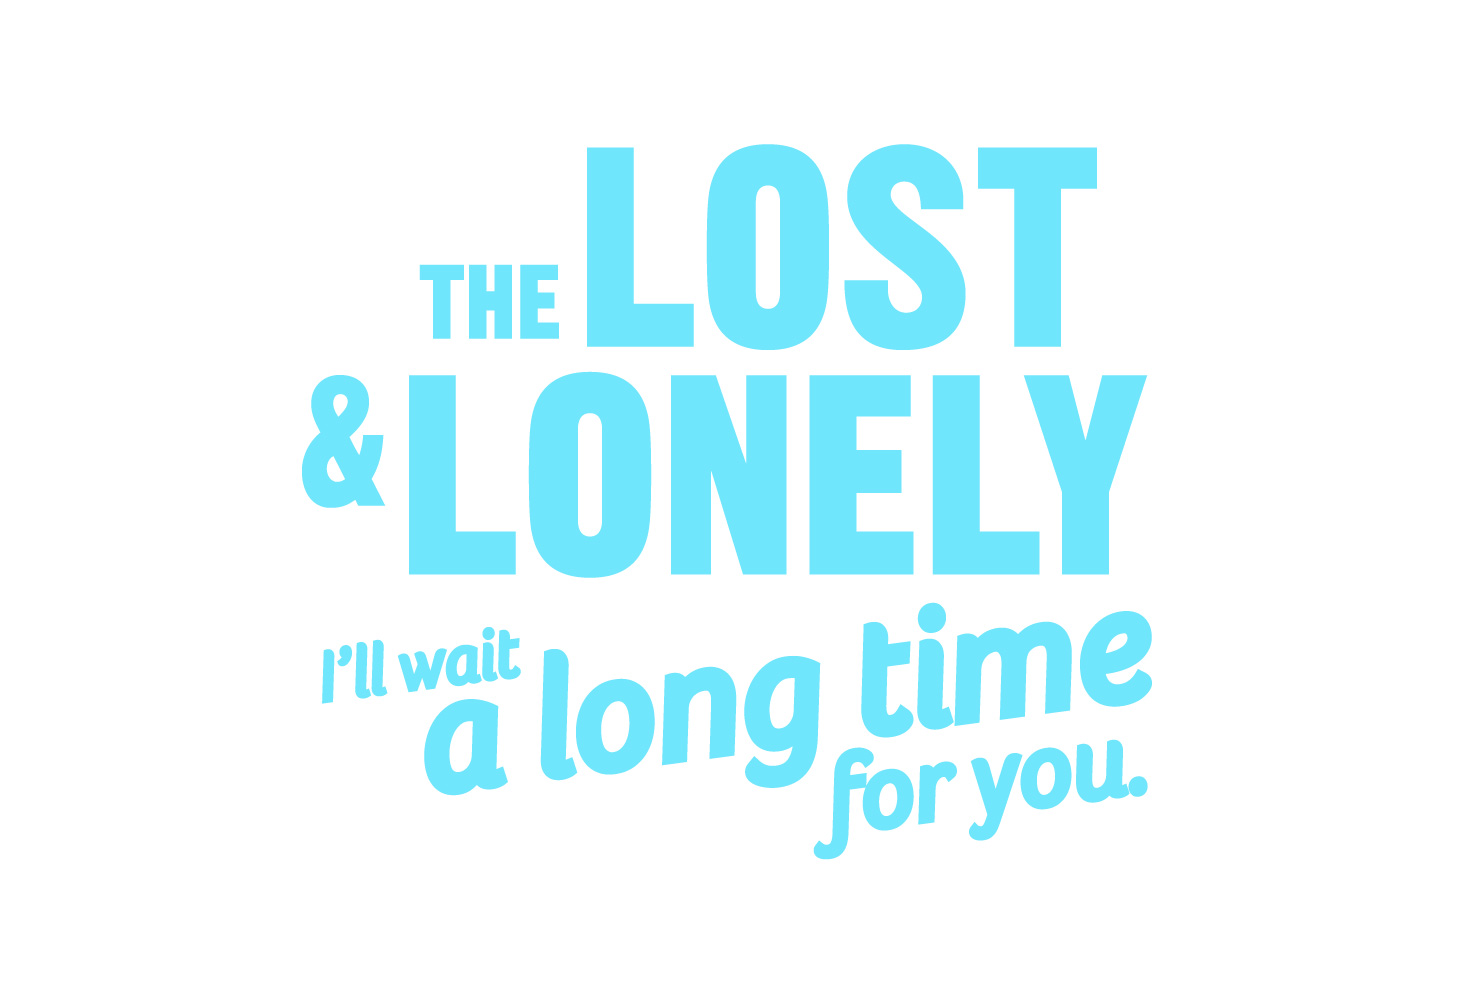 The Lost & Lonely